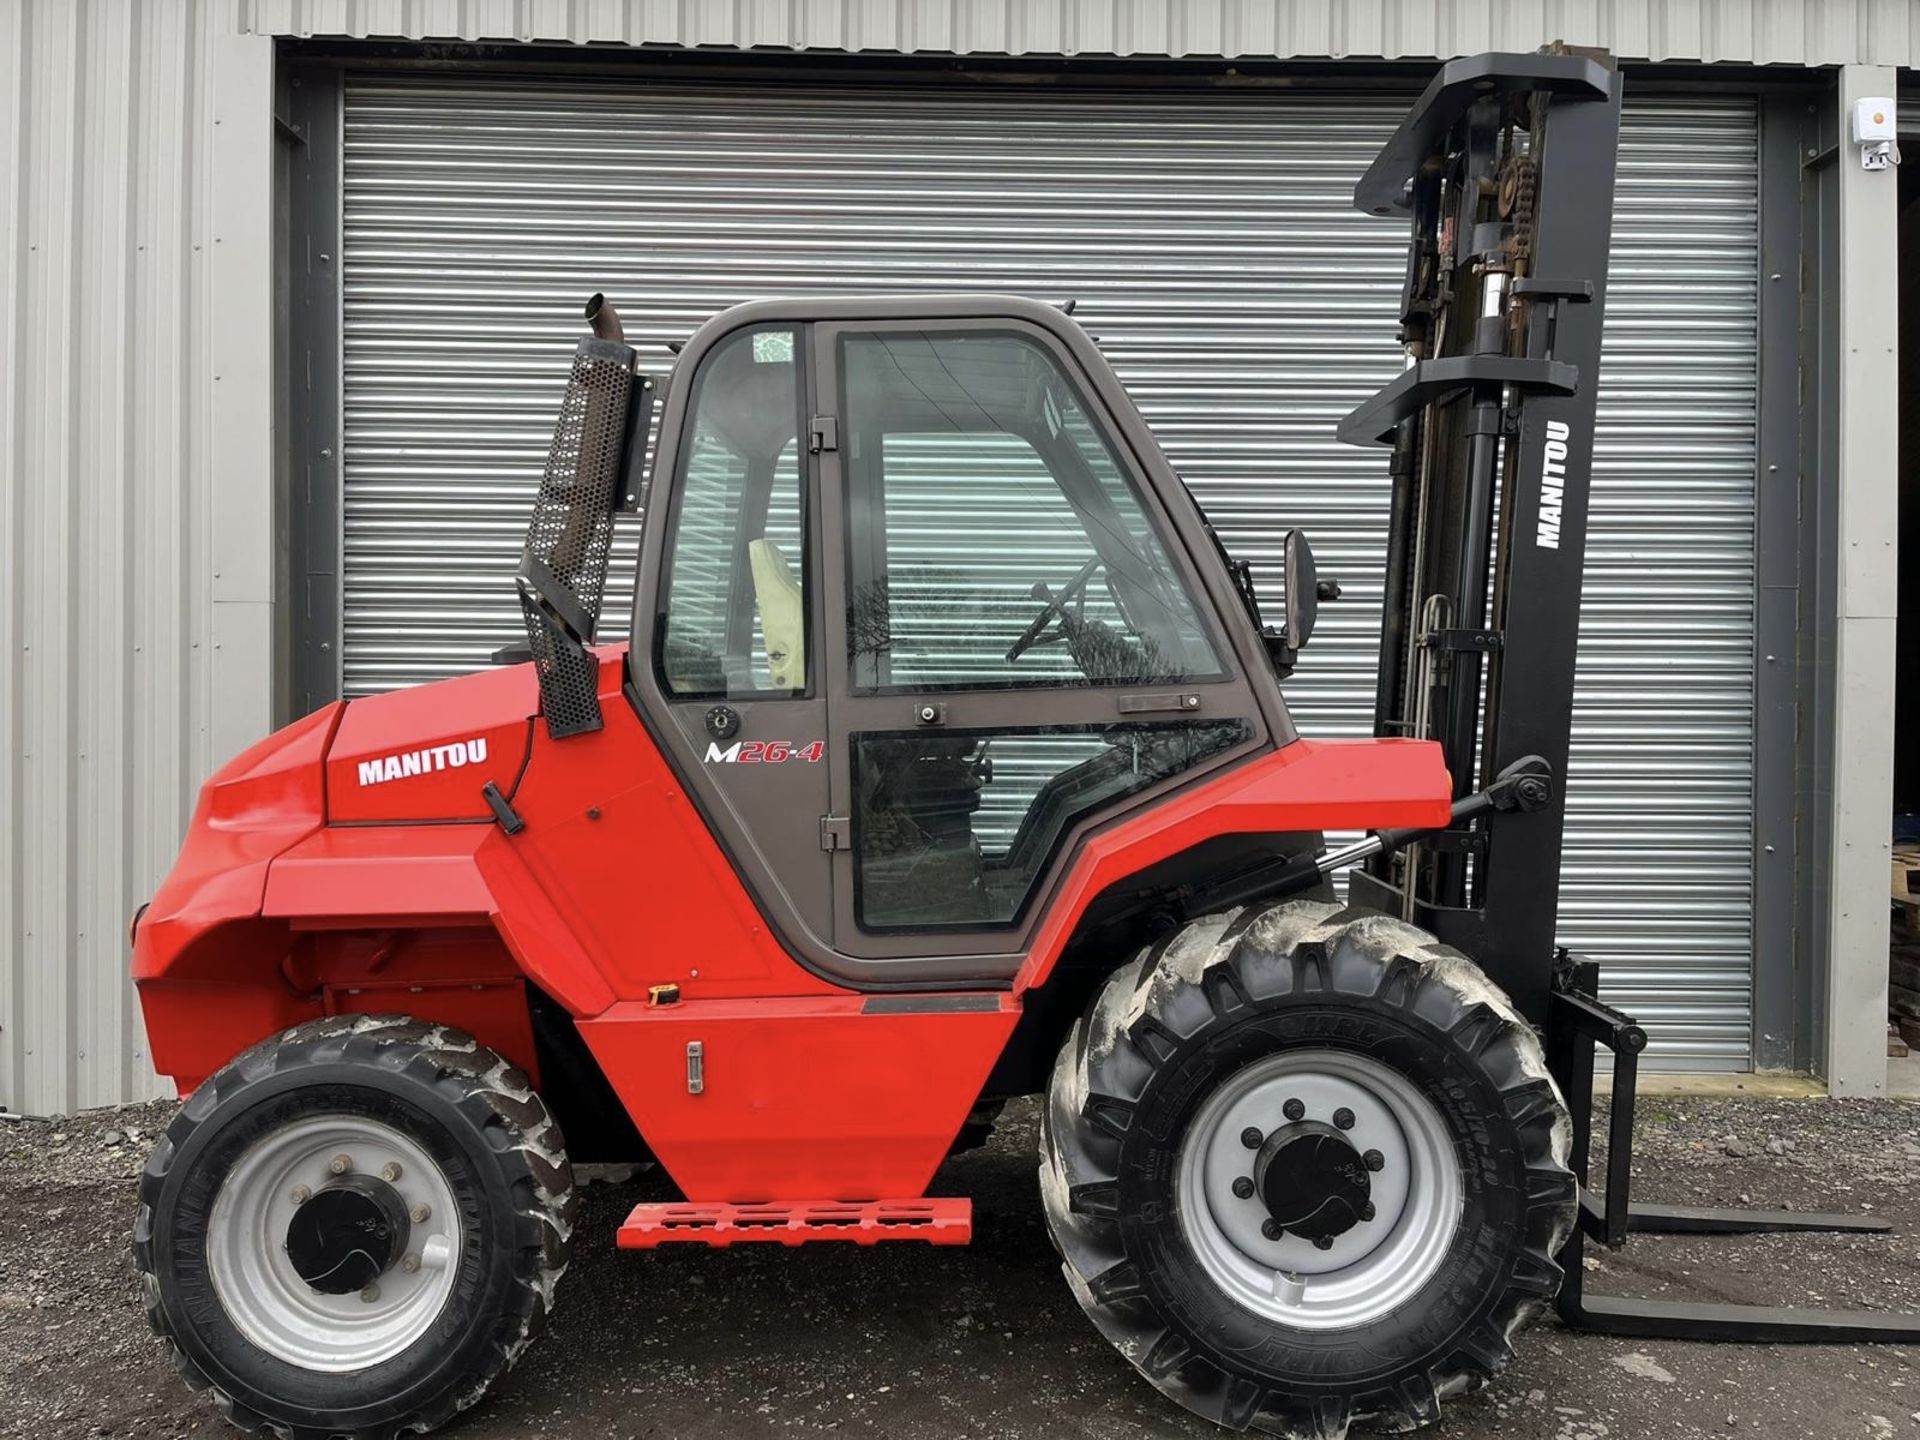 2017, MANITOU - M26, 2.6 Tonne (4WD) Forklift Truck - Image 5 of 6